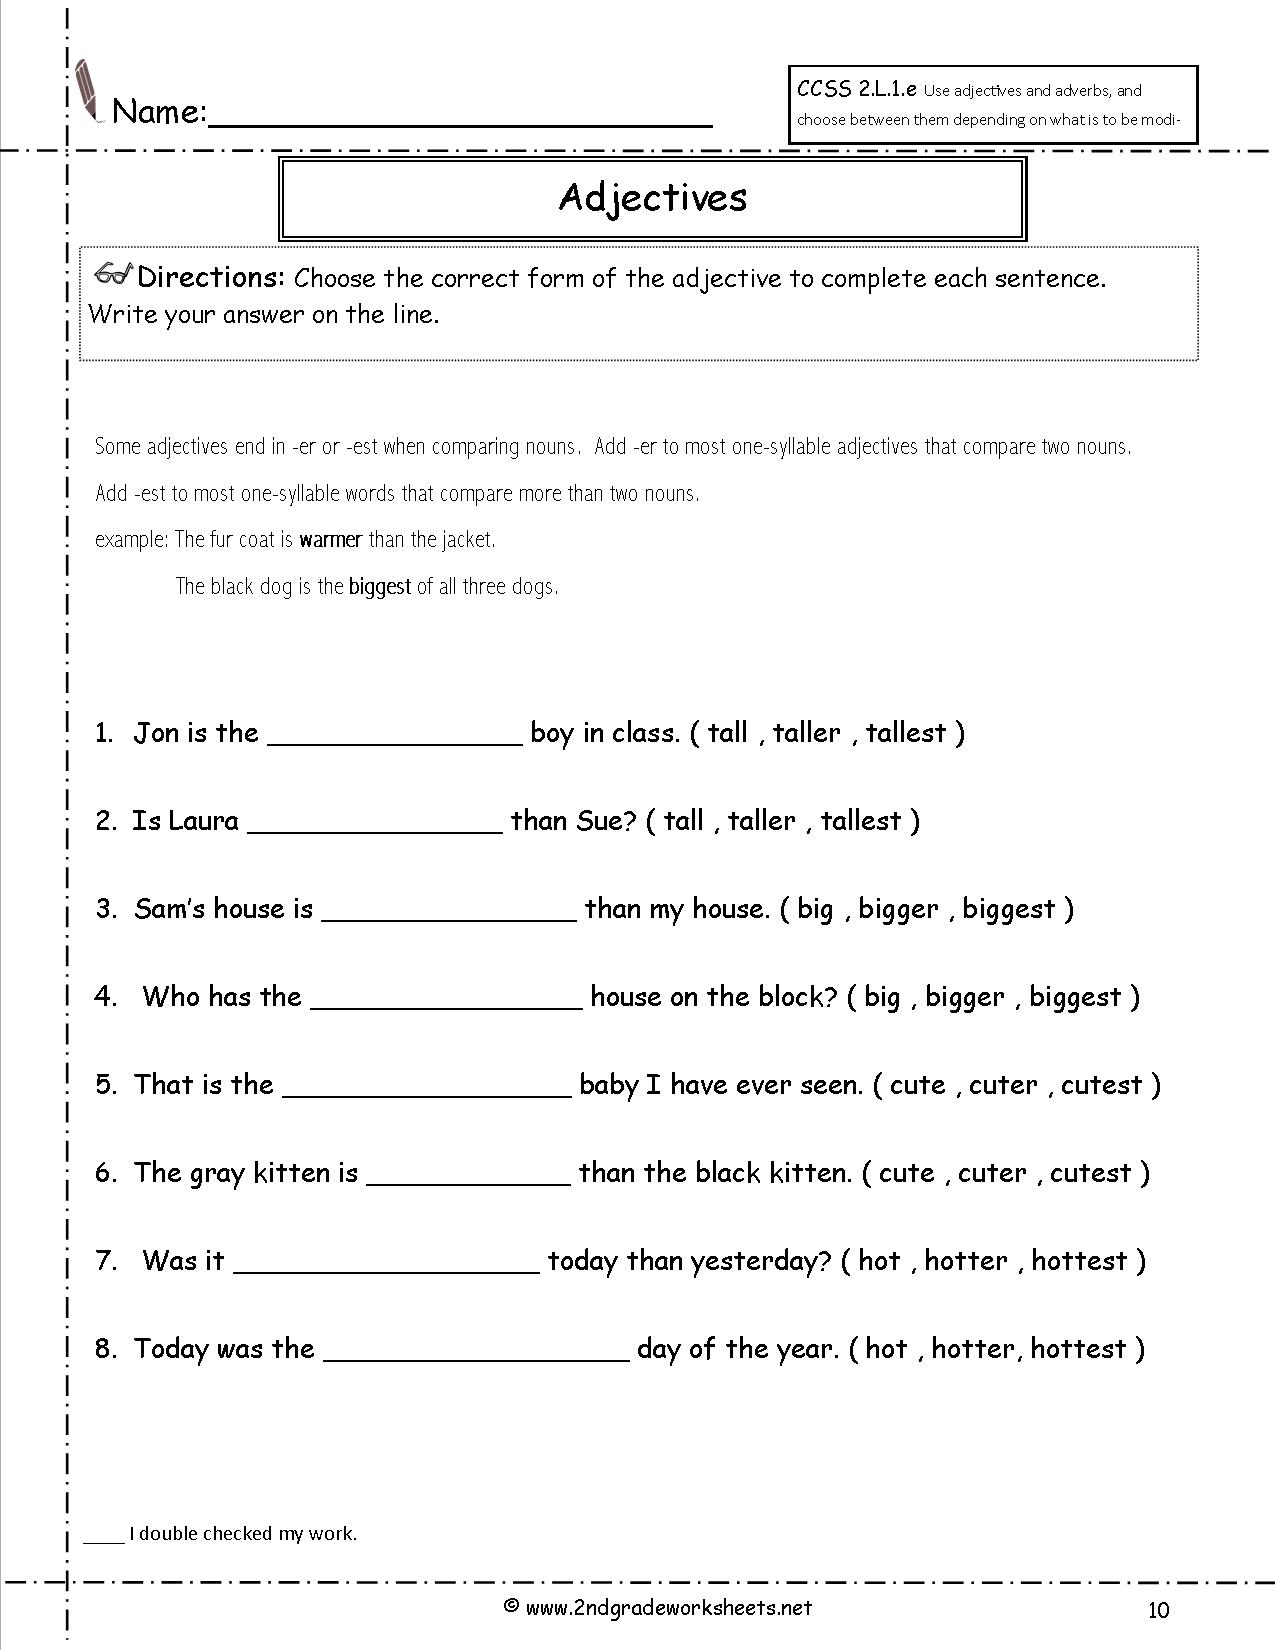 the-order-of-adjectives-english-adjectives-order-of-adjectives-order-of-adjectives-worksheet